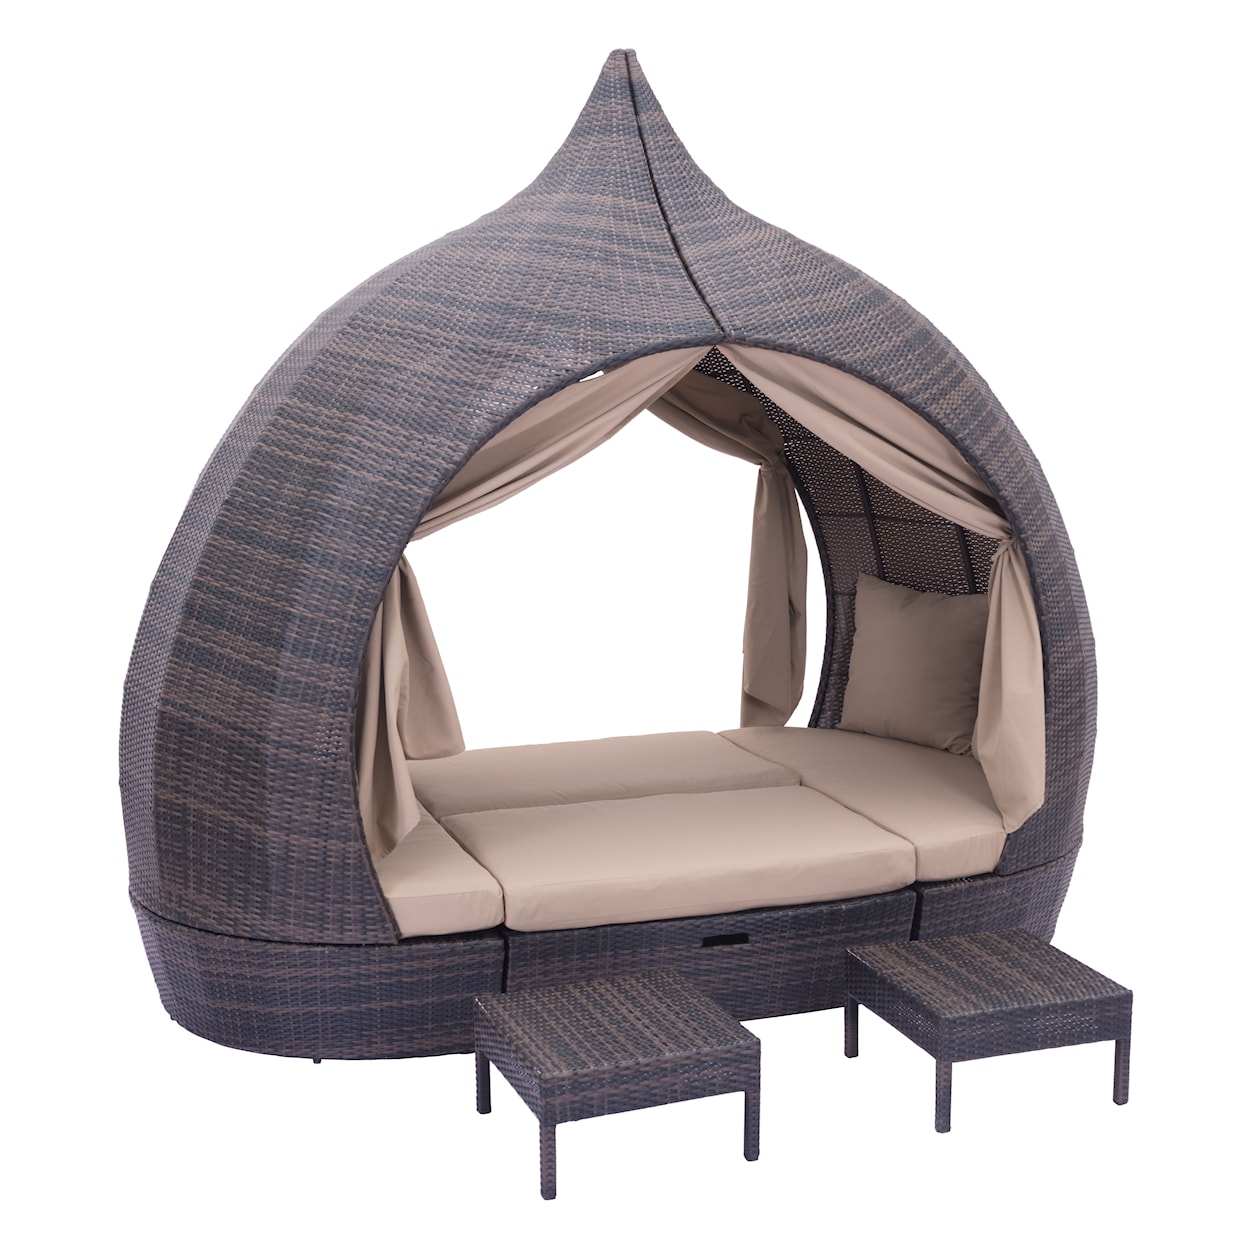 Zuo Majorca Daybed